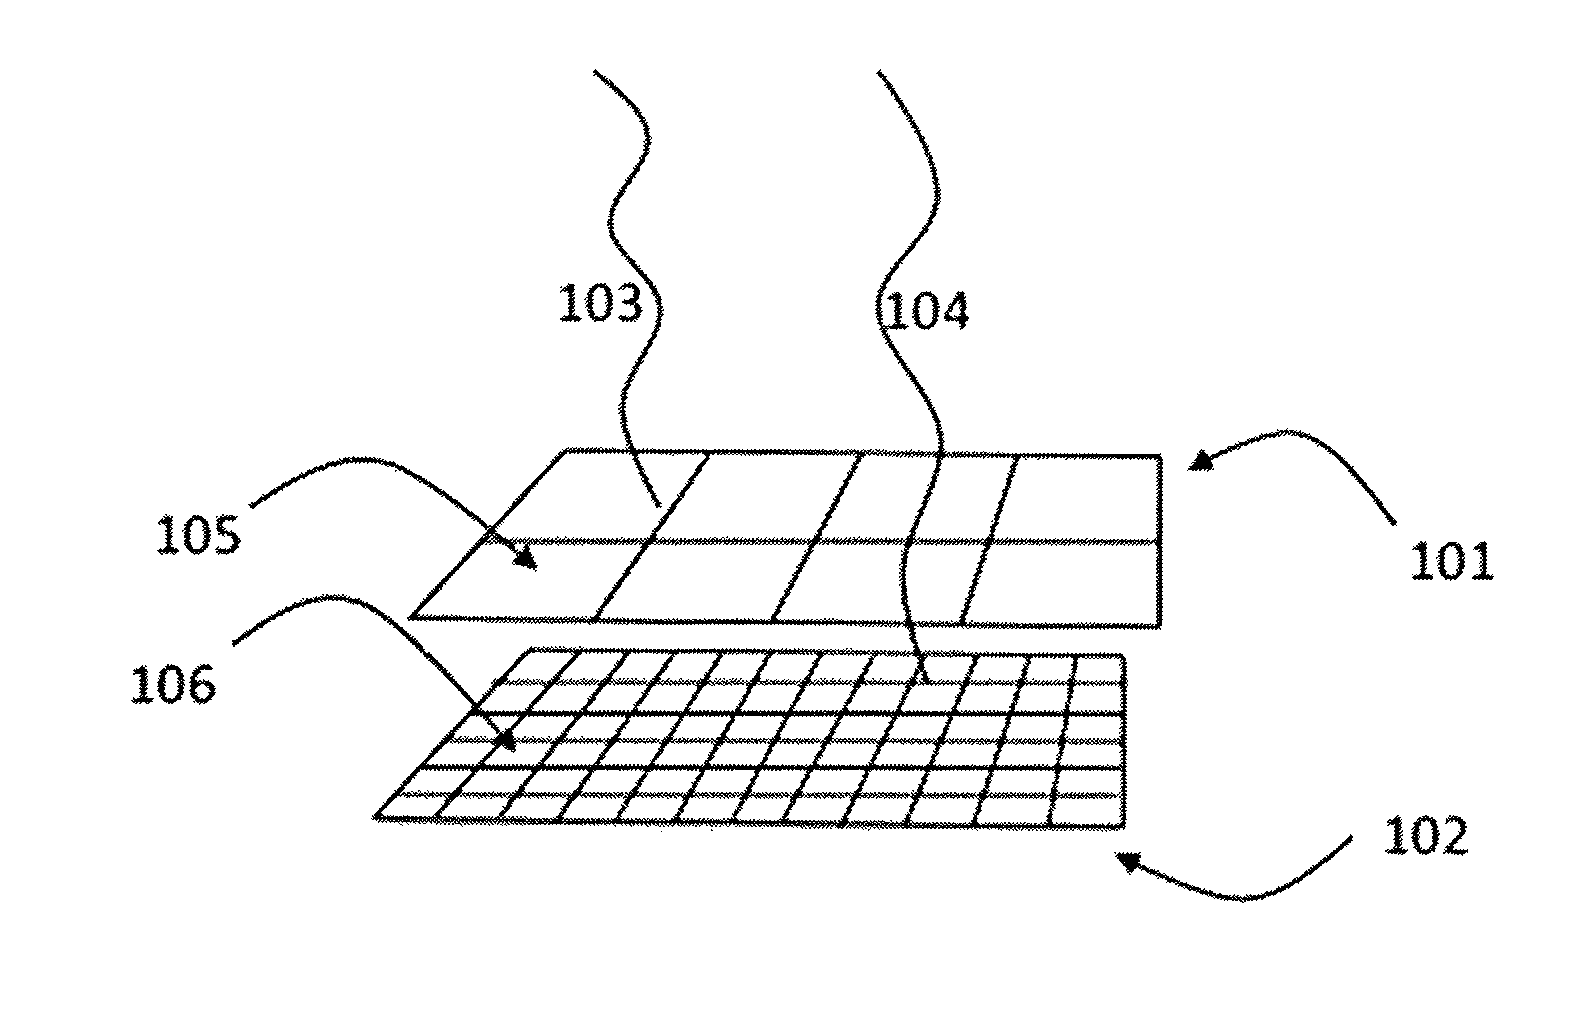 Dual pixel pitch imaging array with extended dynamic range